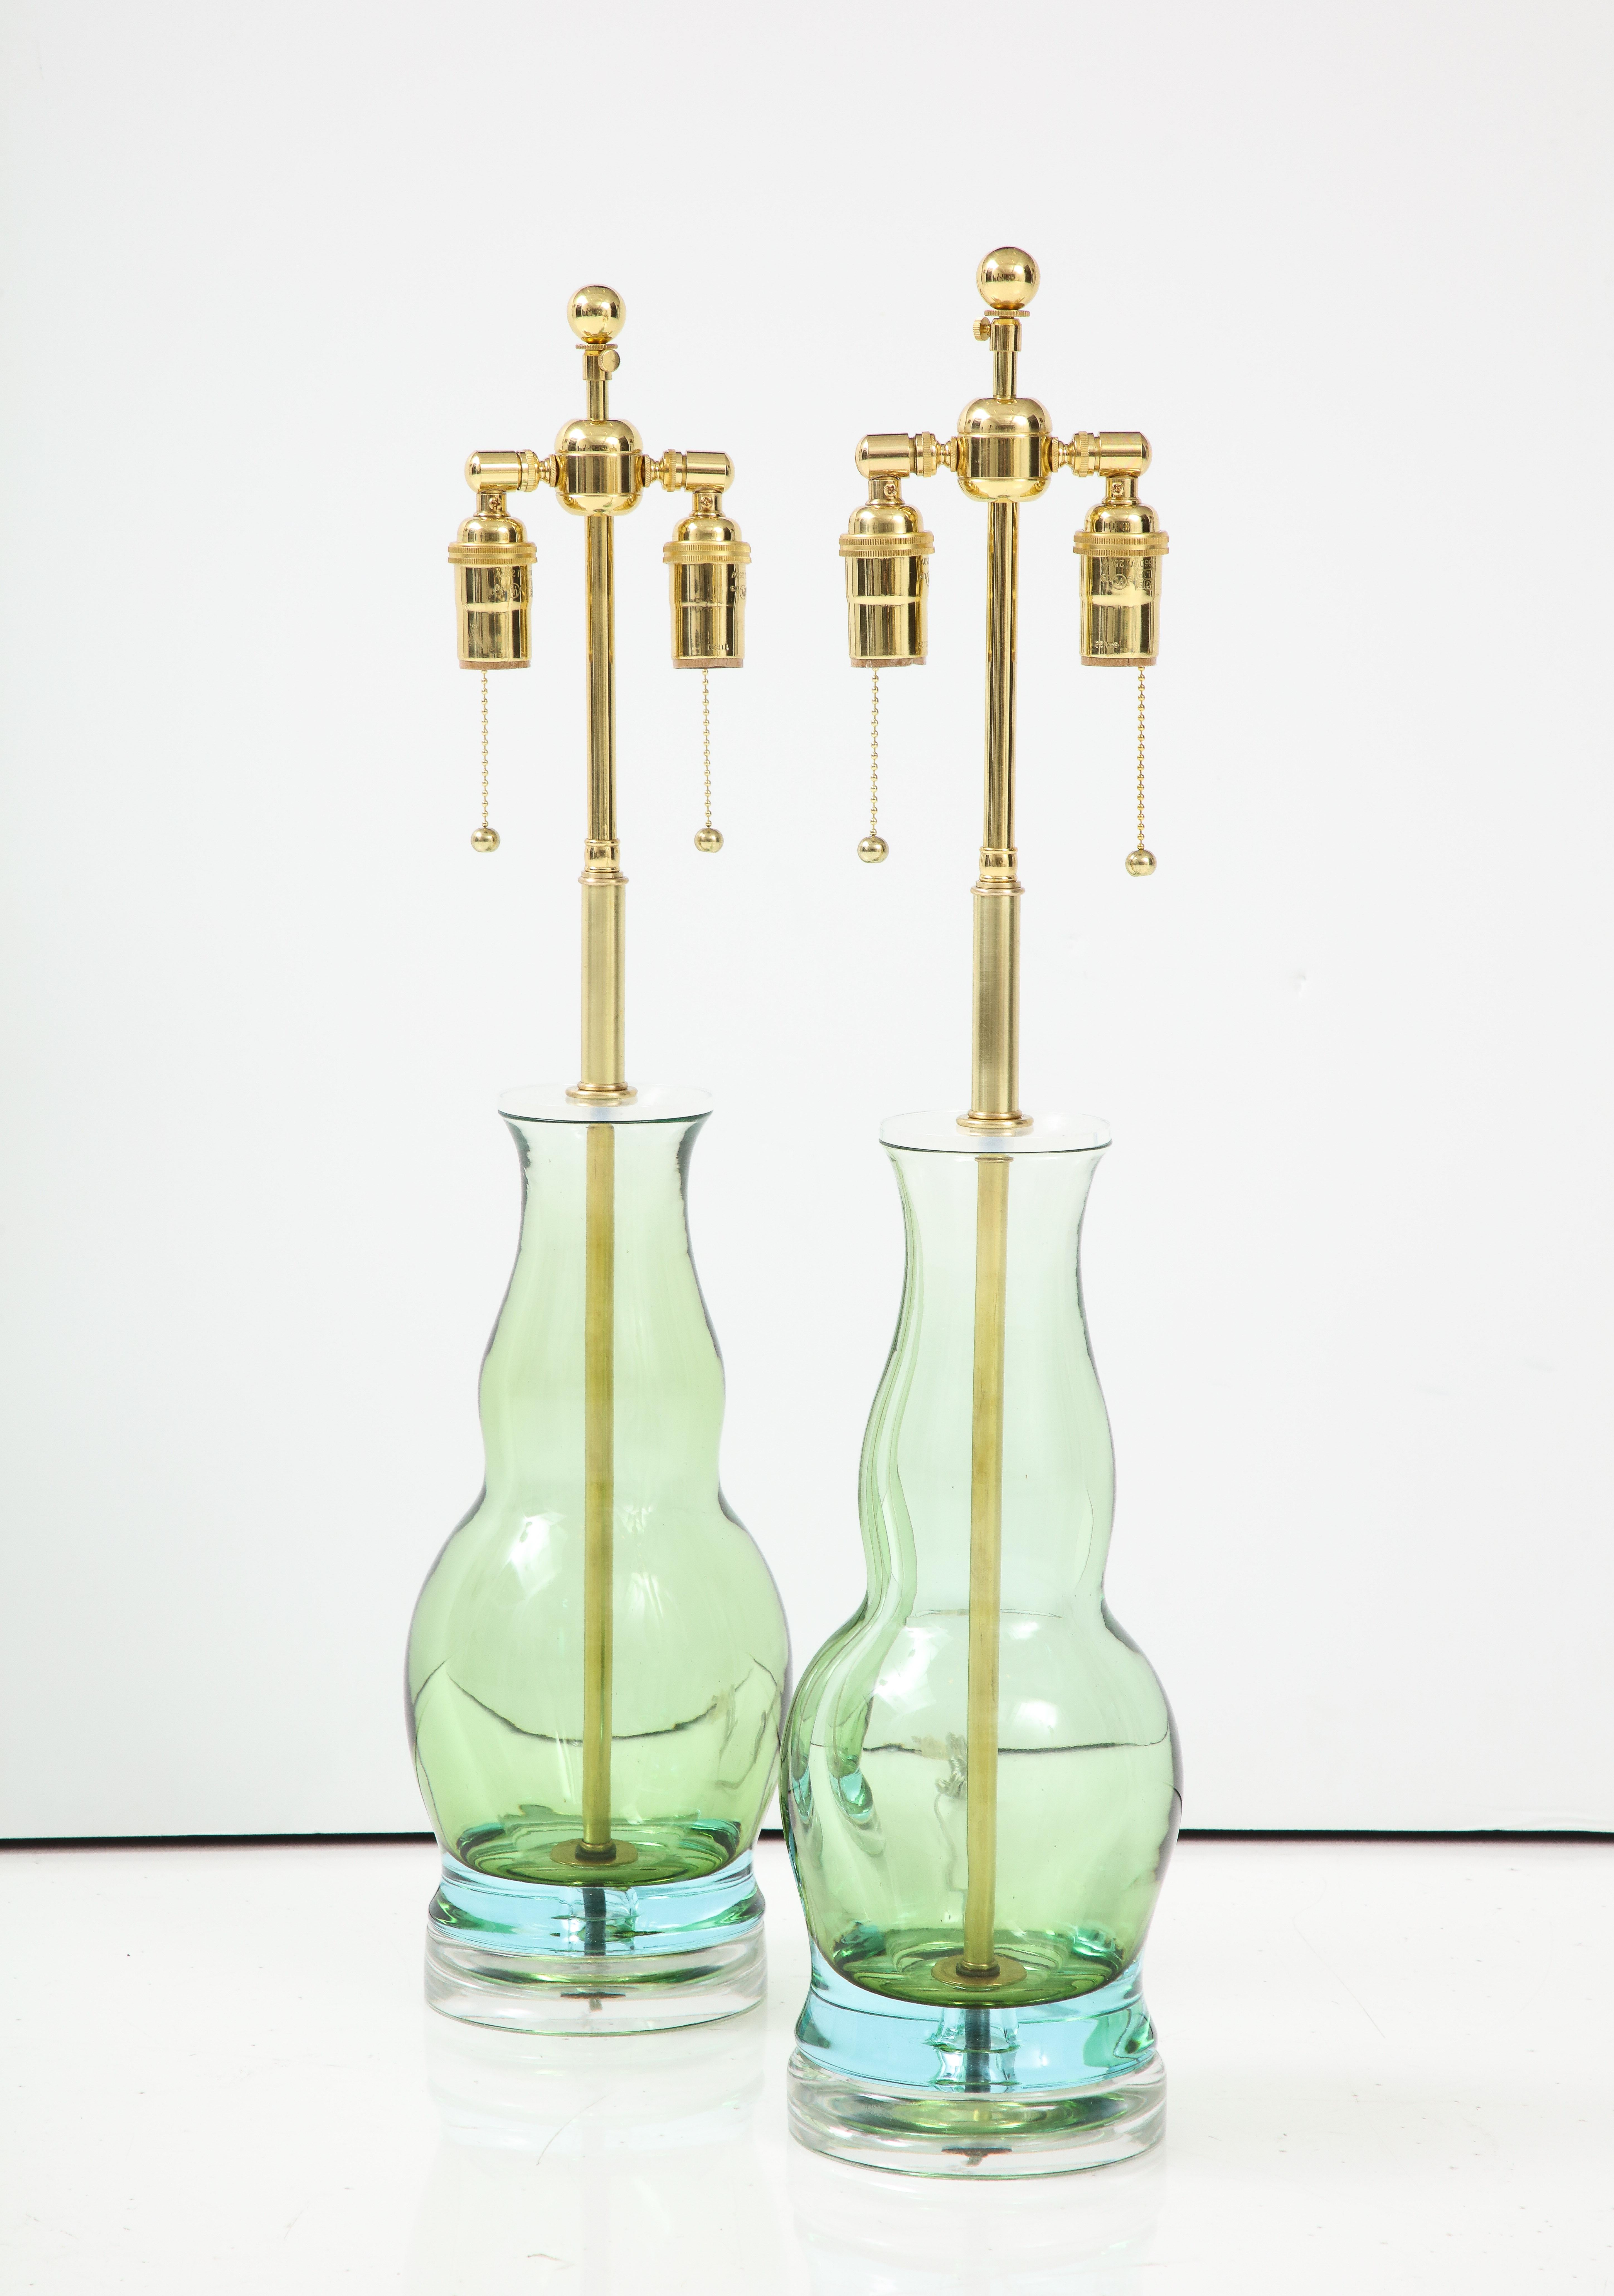 Pair of Bottle form green glass shaped lamps mounted on a thick 
clear glass bases.
They have been Newly rewired with adjustable polished brass double clusters that take standard size light bulbs.
One of the glass forms is slightly larger as they